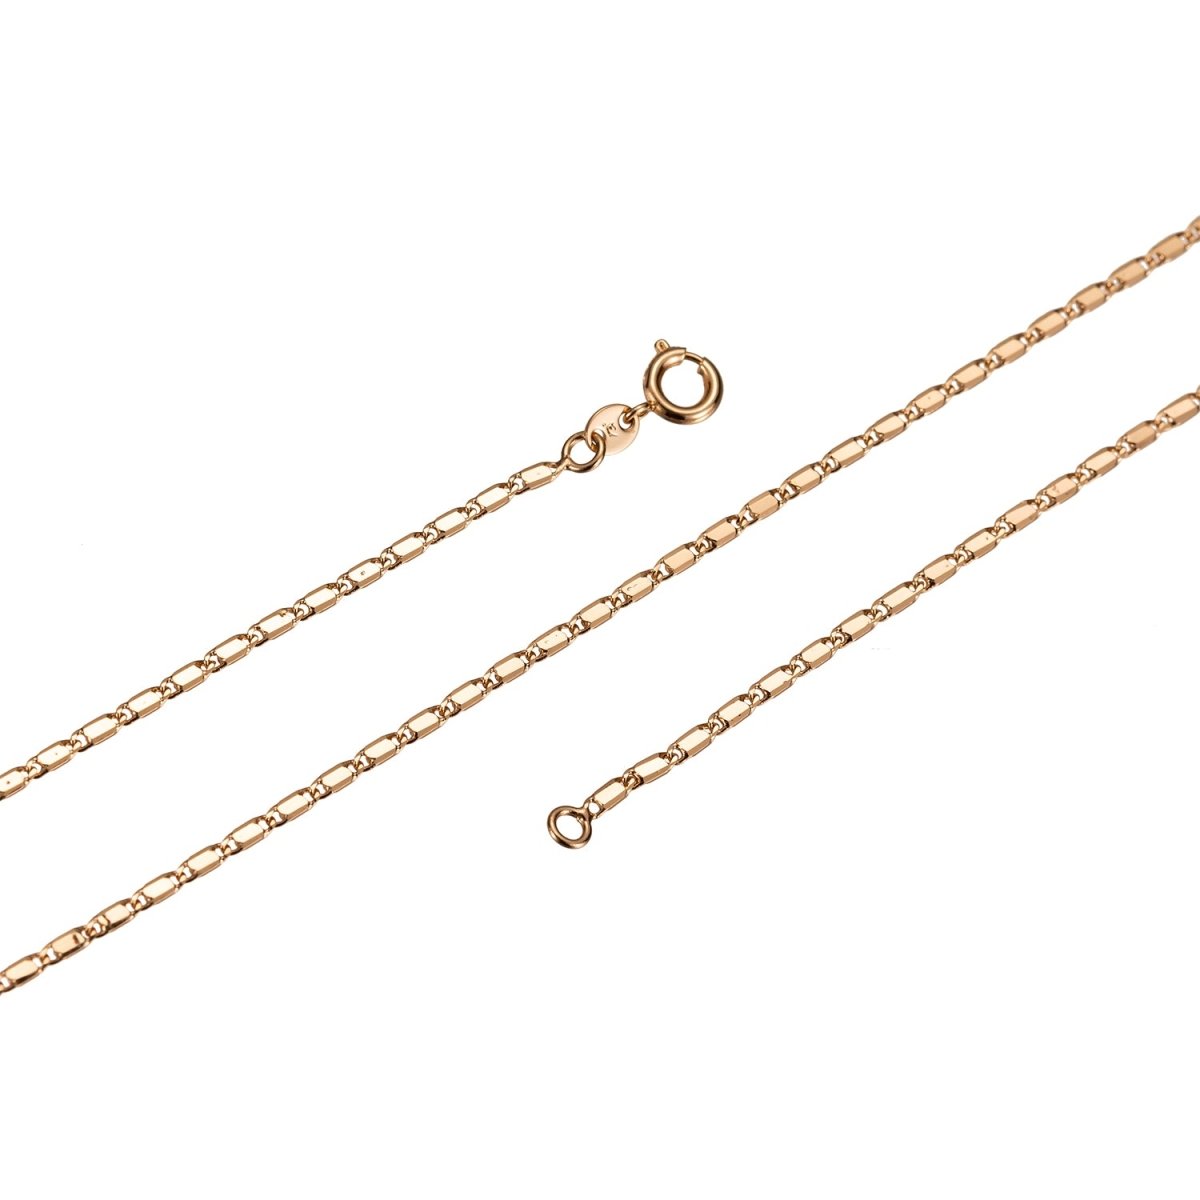 23.5 inch Scroll Chain Necklace, 18K Gold Plated Finished Chain For Jewelry Making, Dainty 1.5mm Unique Necklace w/ Spring Ring | CN-413 Clearance Pricing - DLUXCA